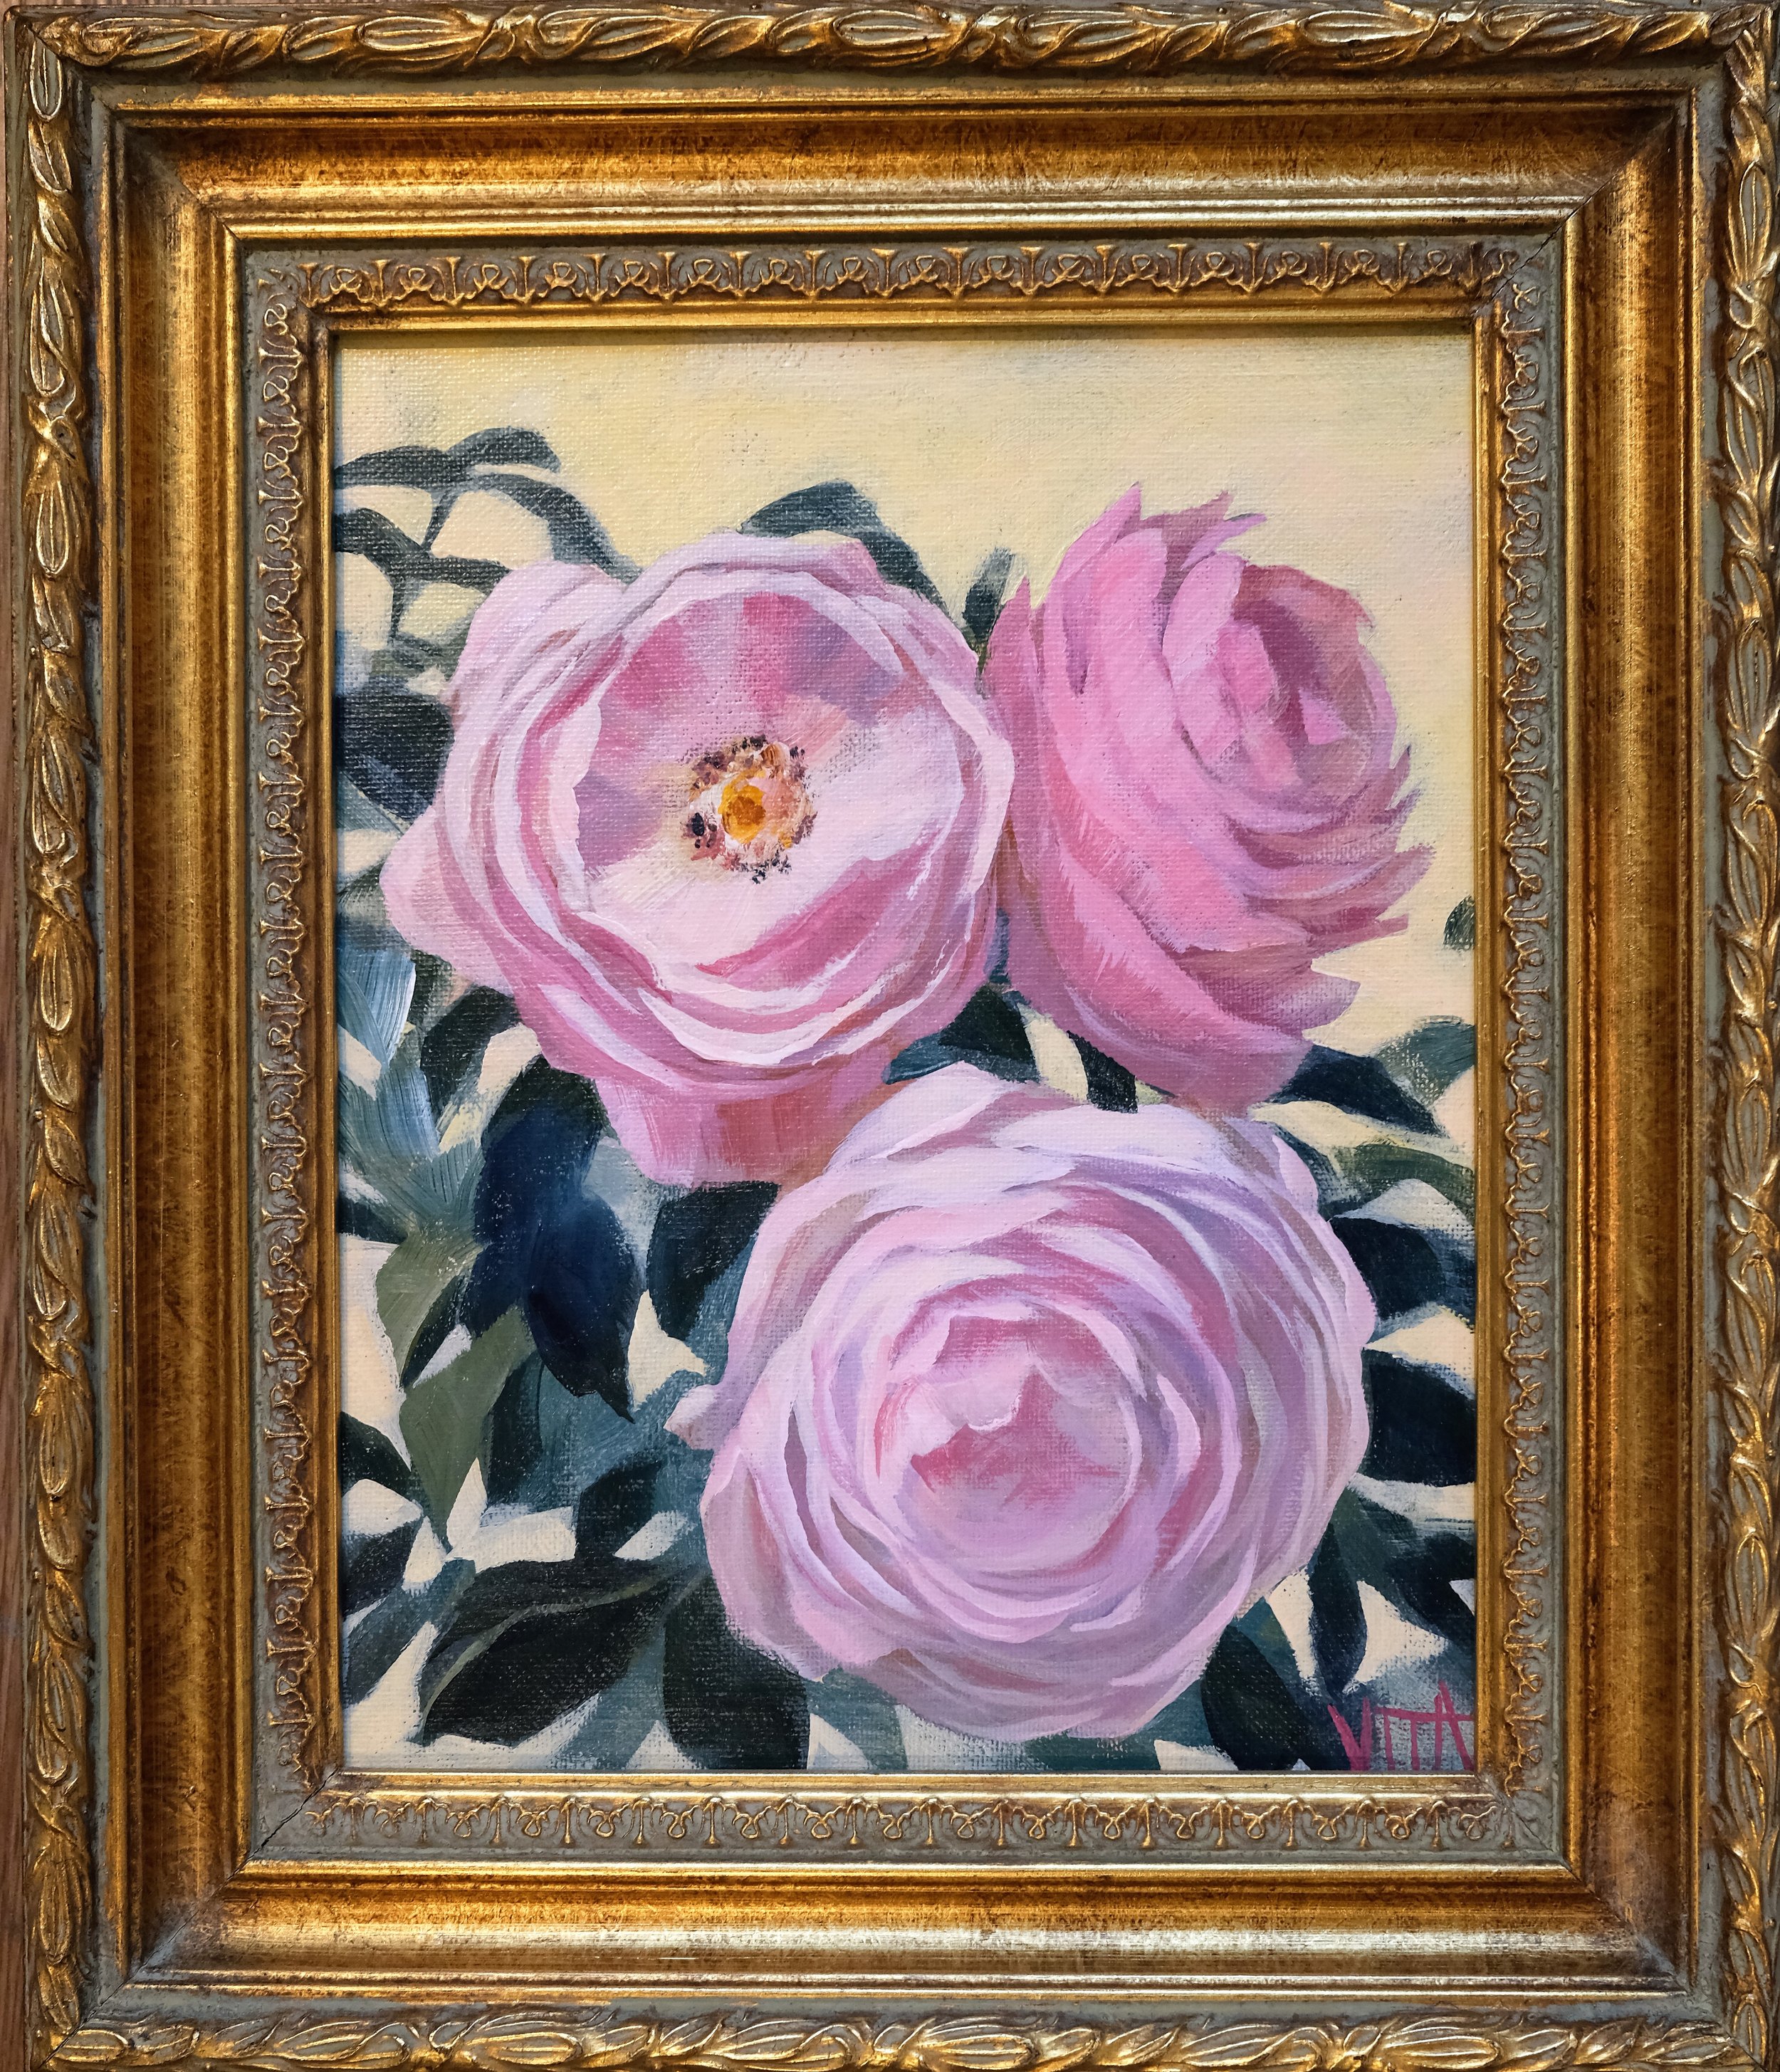 SOLD, Roses by the Yellow House, Acrylic on Canvas, Copyright 2020 Hirschten